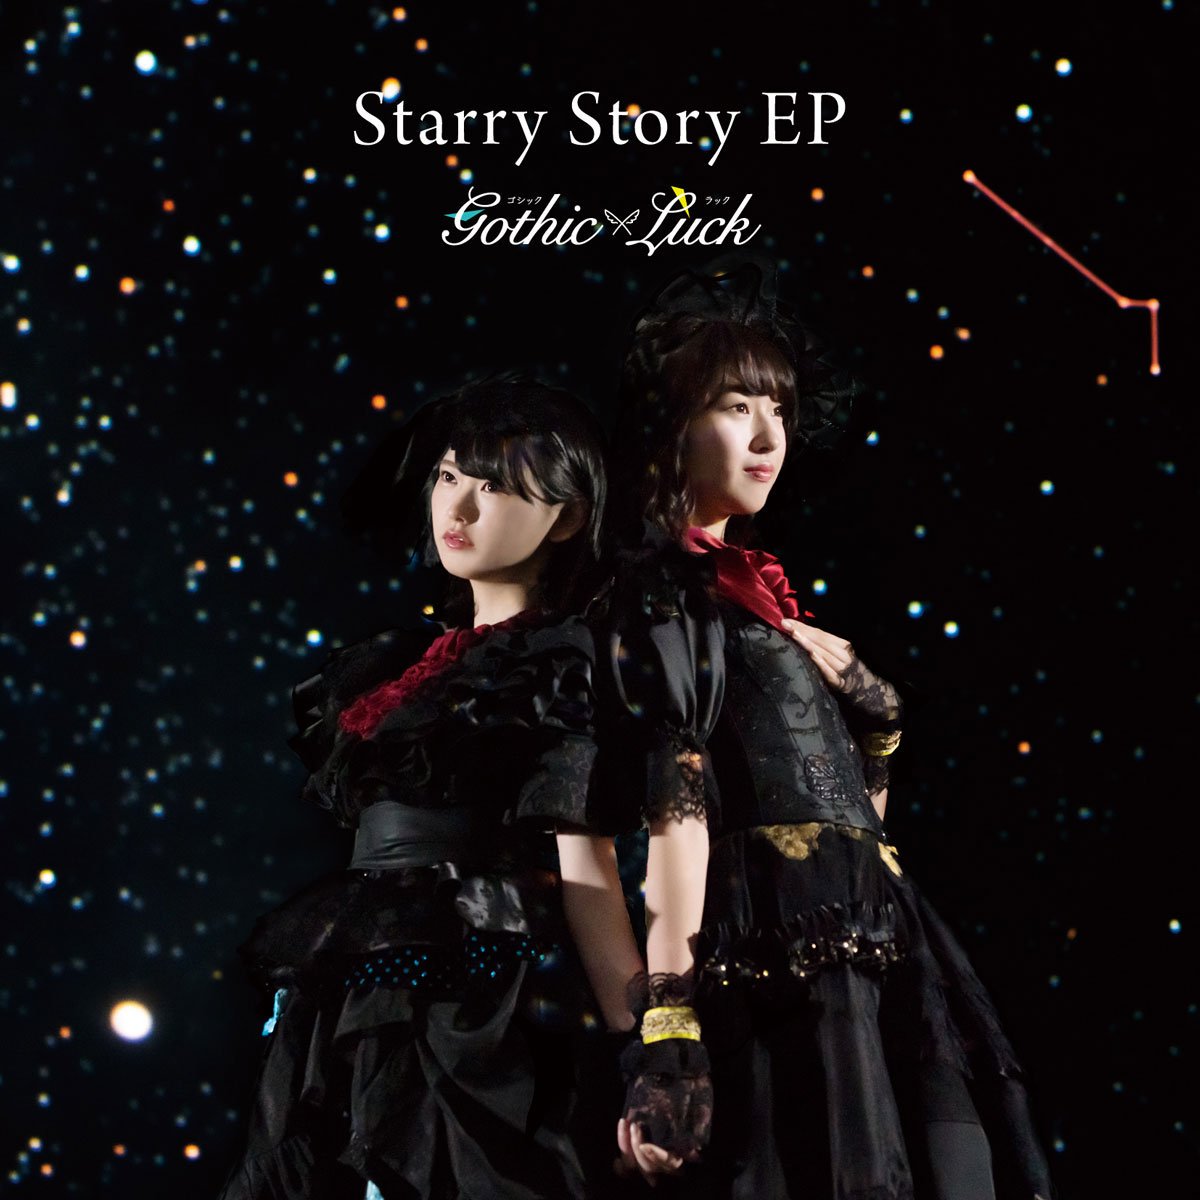 [SINGLE] Gothic×Luck - Starry Story EP [Kemono Friends 2 ED] [13.03.2019]